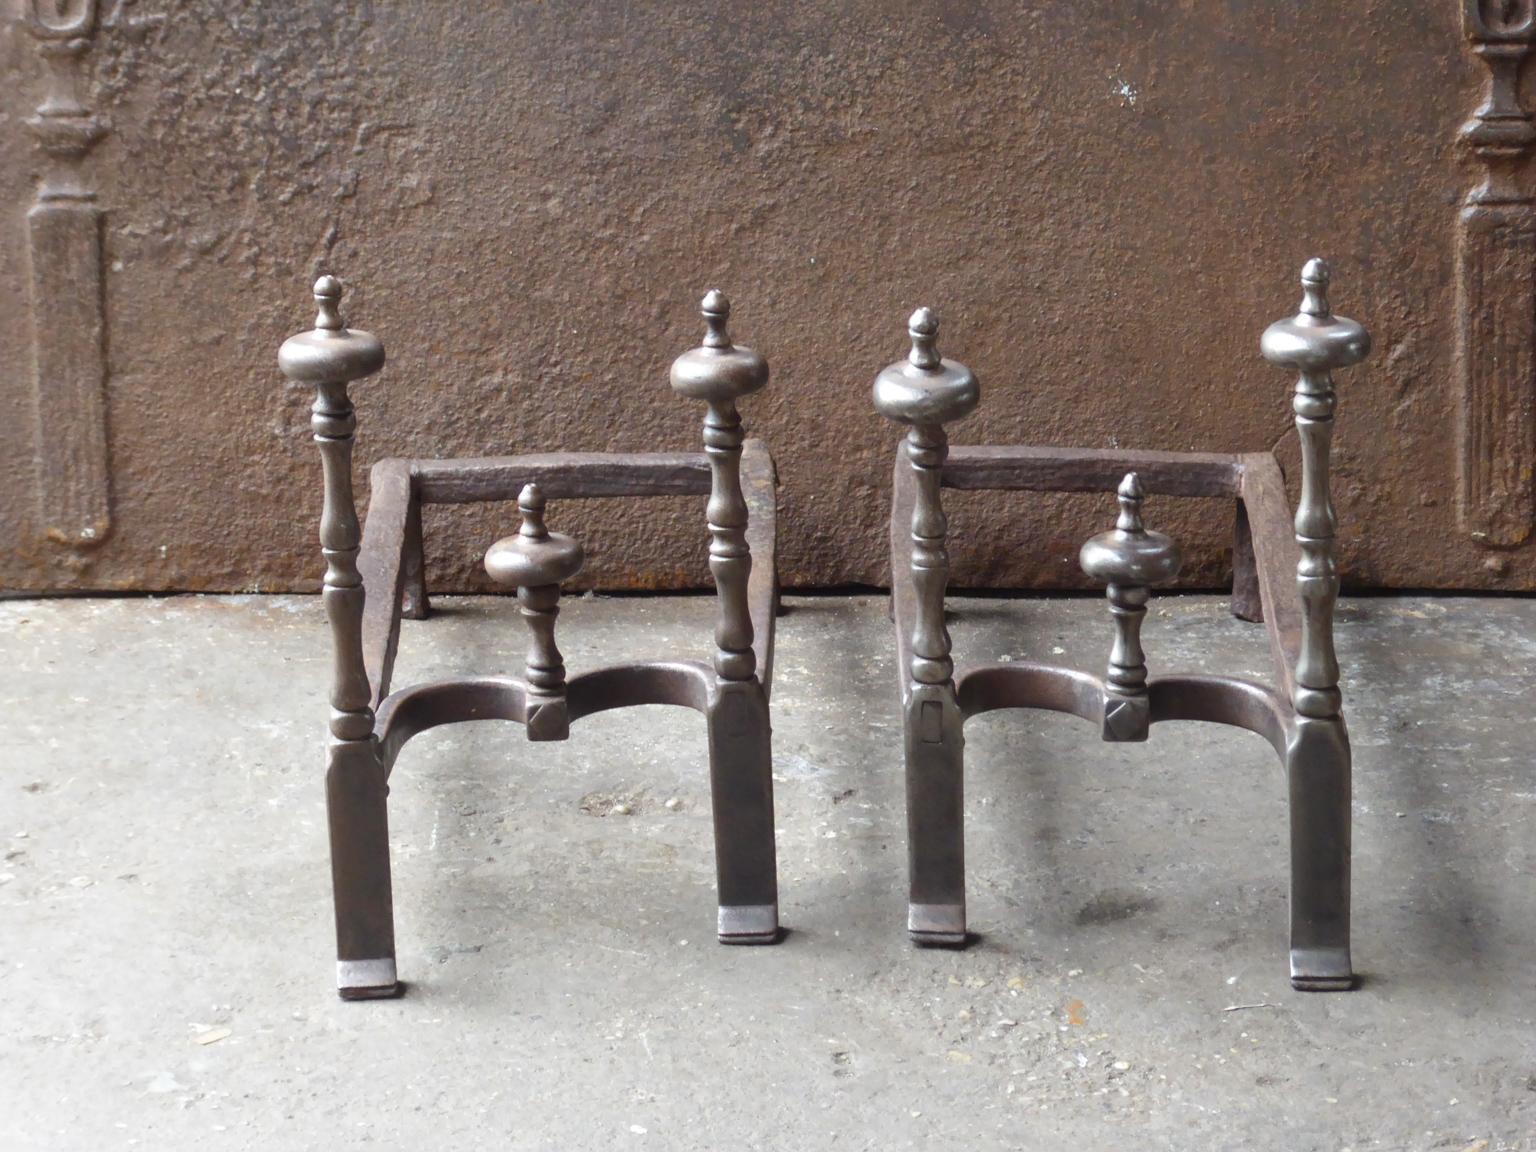 Late 18th or early 19th century French neoclassical period andirons. The andirons are hand forged and made of wrought iron. The condition of the andirons is good.

